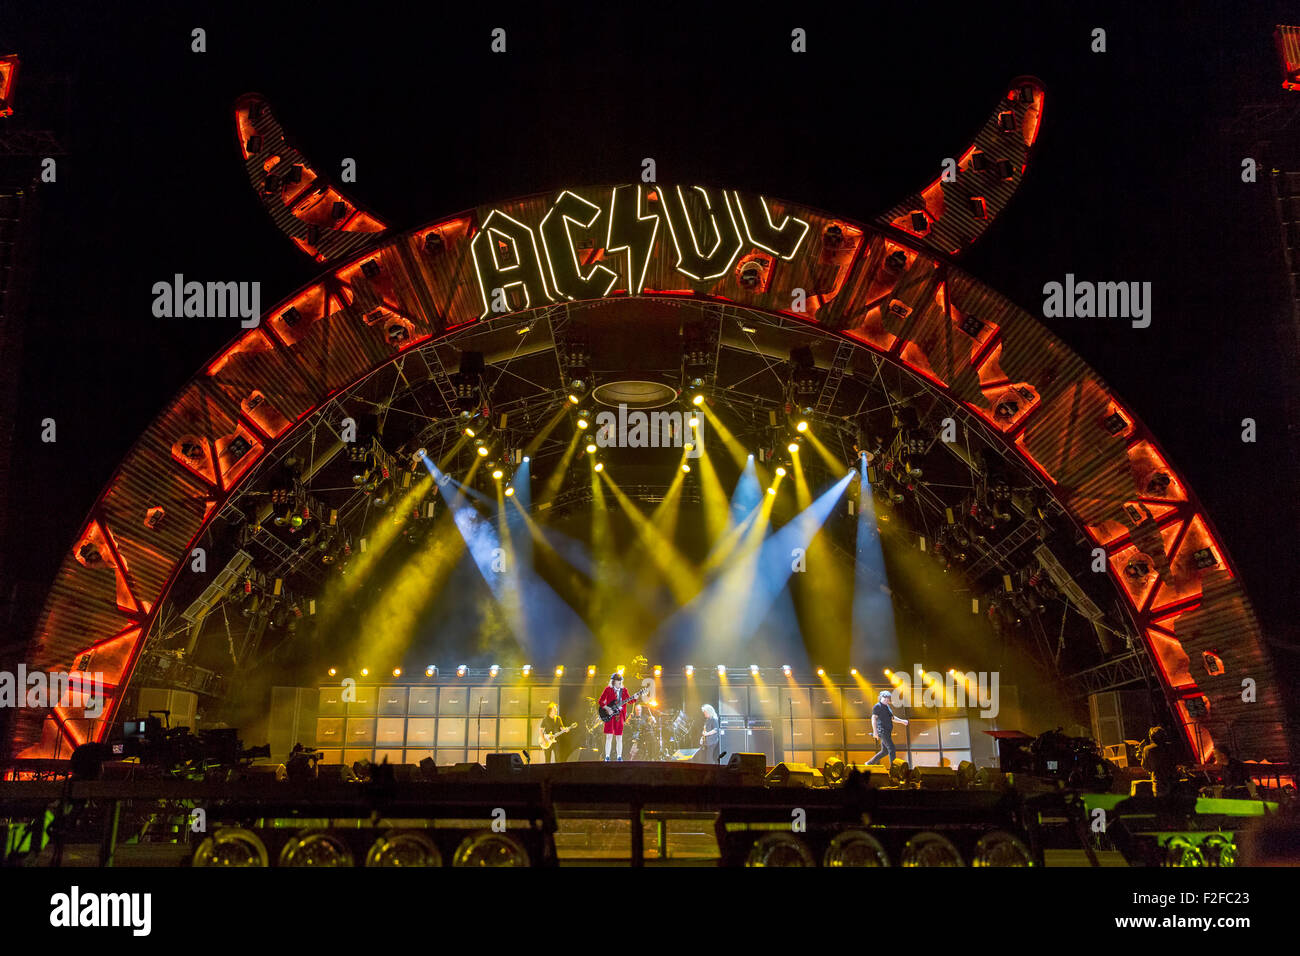 Chicago, Illinois, USA. 15th Sep, 2015. AC/DC performs live during the Rock or Bust tour at Wrigley Field in Chicago, Illinois © Daniel DeSlover/ZUMA Wire/Alamy Live News Stock Photo